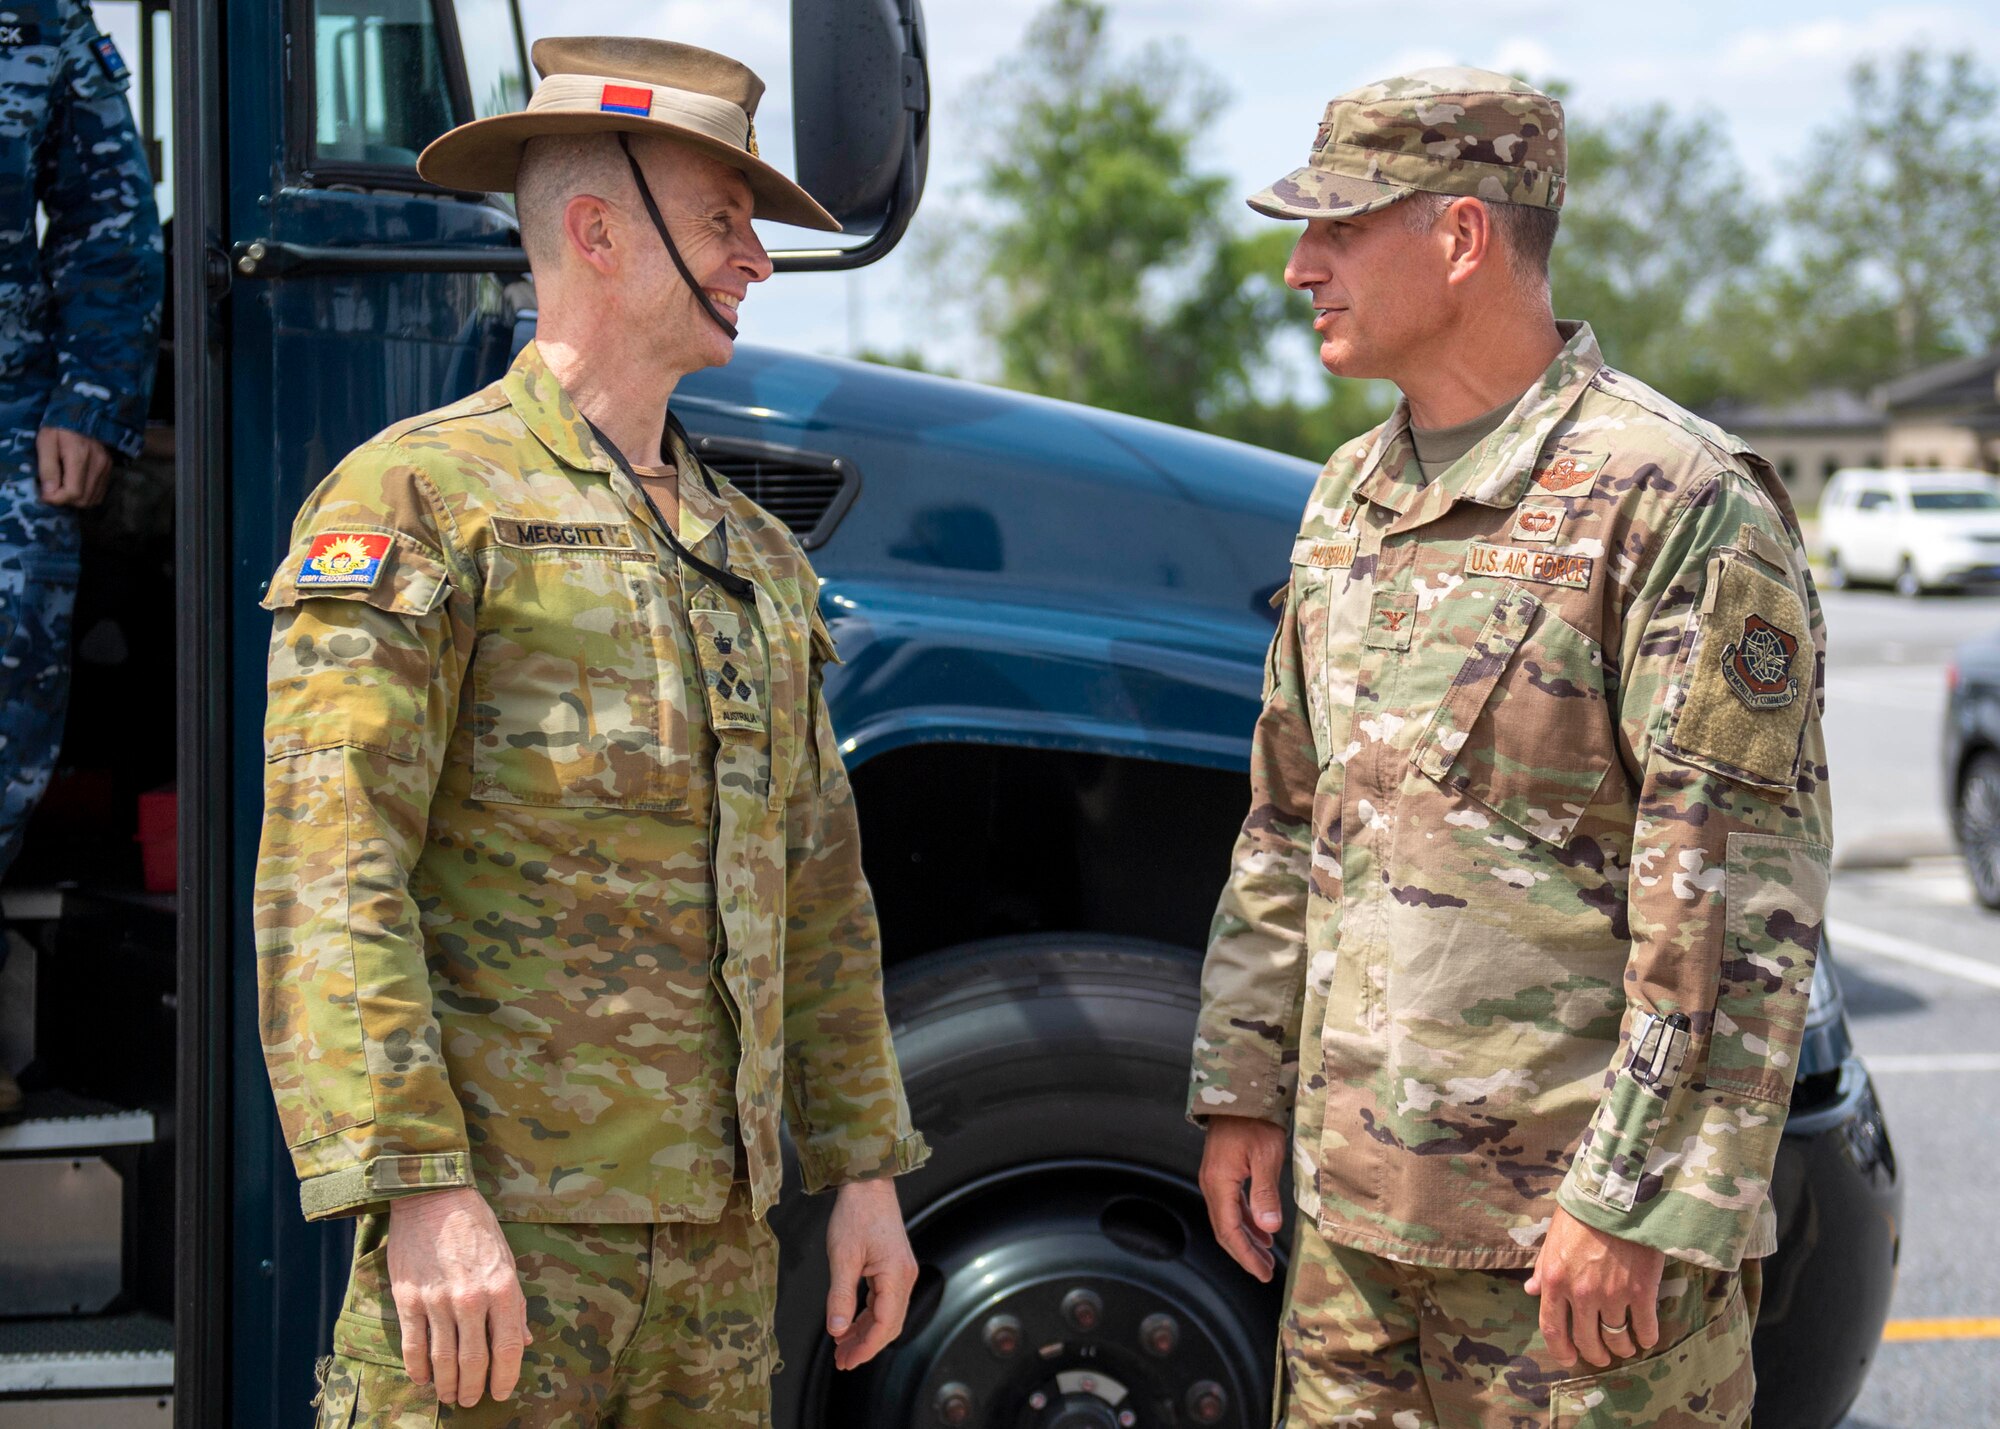 Col. Matt Husemann, right, 436th Airlift Wing commander, greets Australian Army Brigadier Hugh Meggitt, Military Attaché – Washington, during a foreign military sales mission at Dover Air Force Base, Delaware, June 7, 2022. The U.S. and Australia maintain a robust relationship that serves as an anchor for peace and stability in the Indo-Pacific region and around the world. Due to its strategic location, Dover AFB supports approximately $3.5 billion worth of foreign military sales annually. (U.S. Air Force photo by Tech. Sgt. J.D. Strong II)